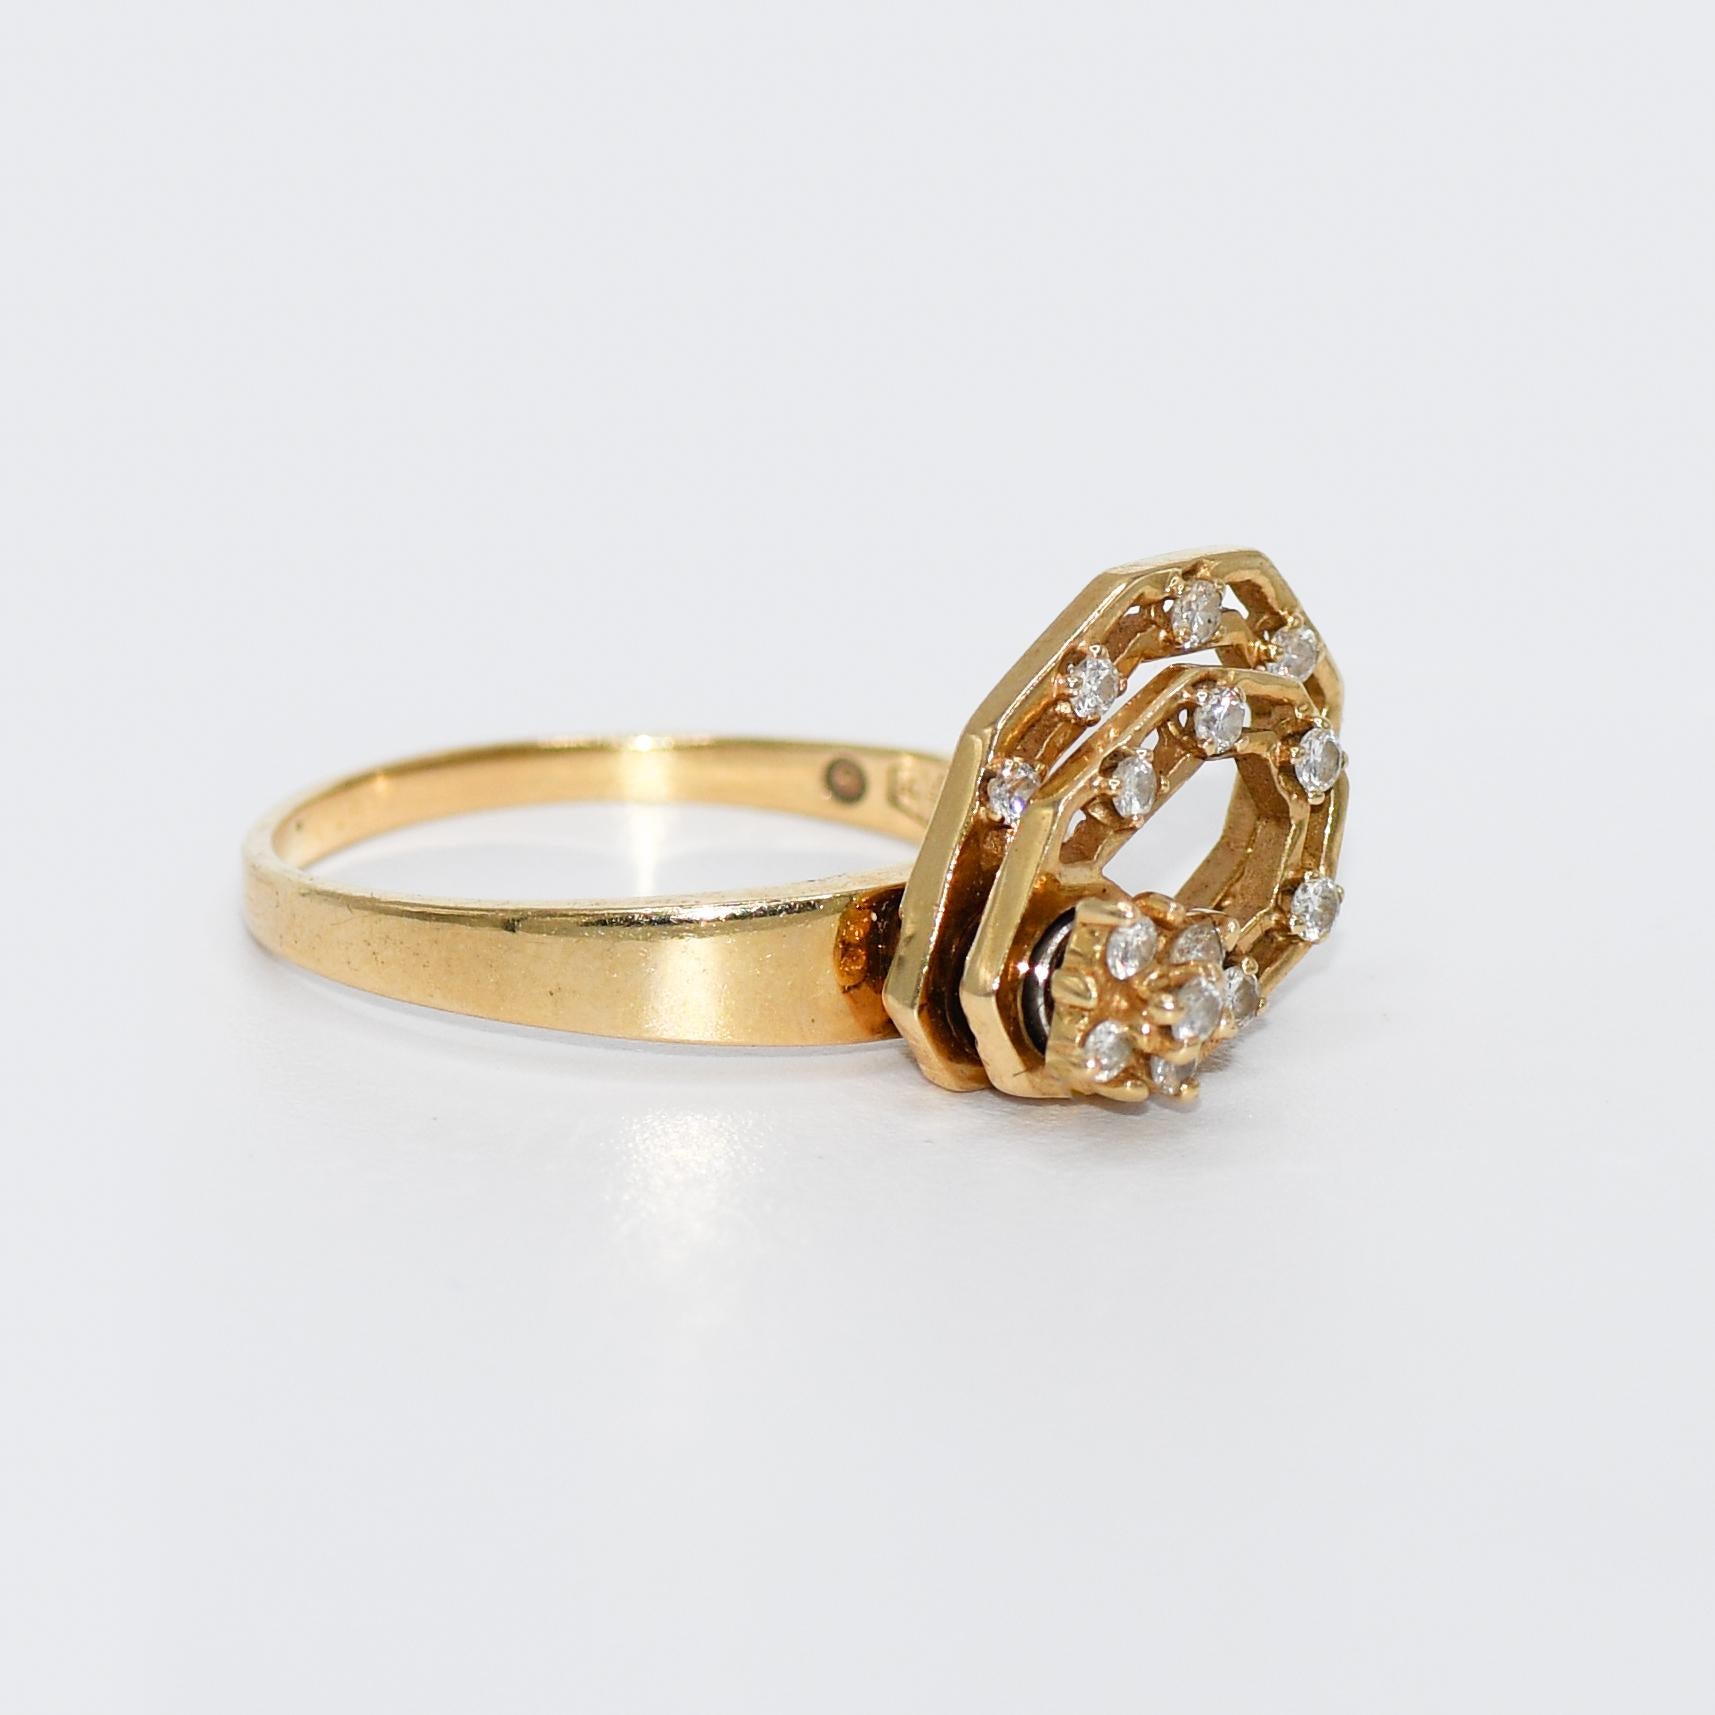 14K Yellow Gold Free Spinning Diamond Cocktail Ring, 5.8gr
14K Free Spinning Diamond Cocktail Ring
There is .20tdw, Clarity SI1-SI2, Color G-H
Stamped 14k, weighs 5.9gr
Size 10 1/2
Can be sized for additional fee